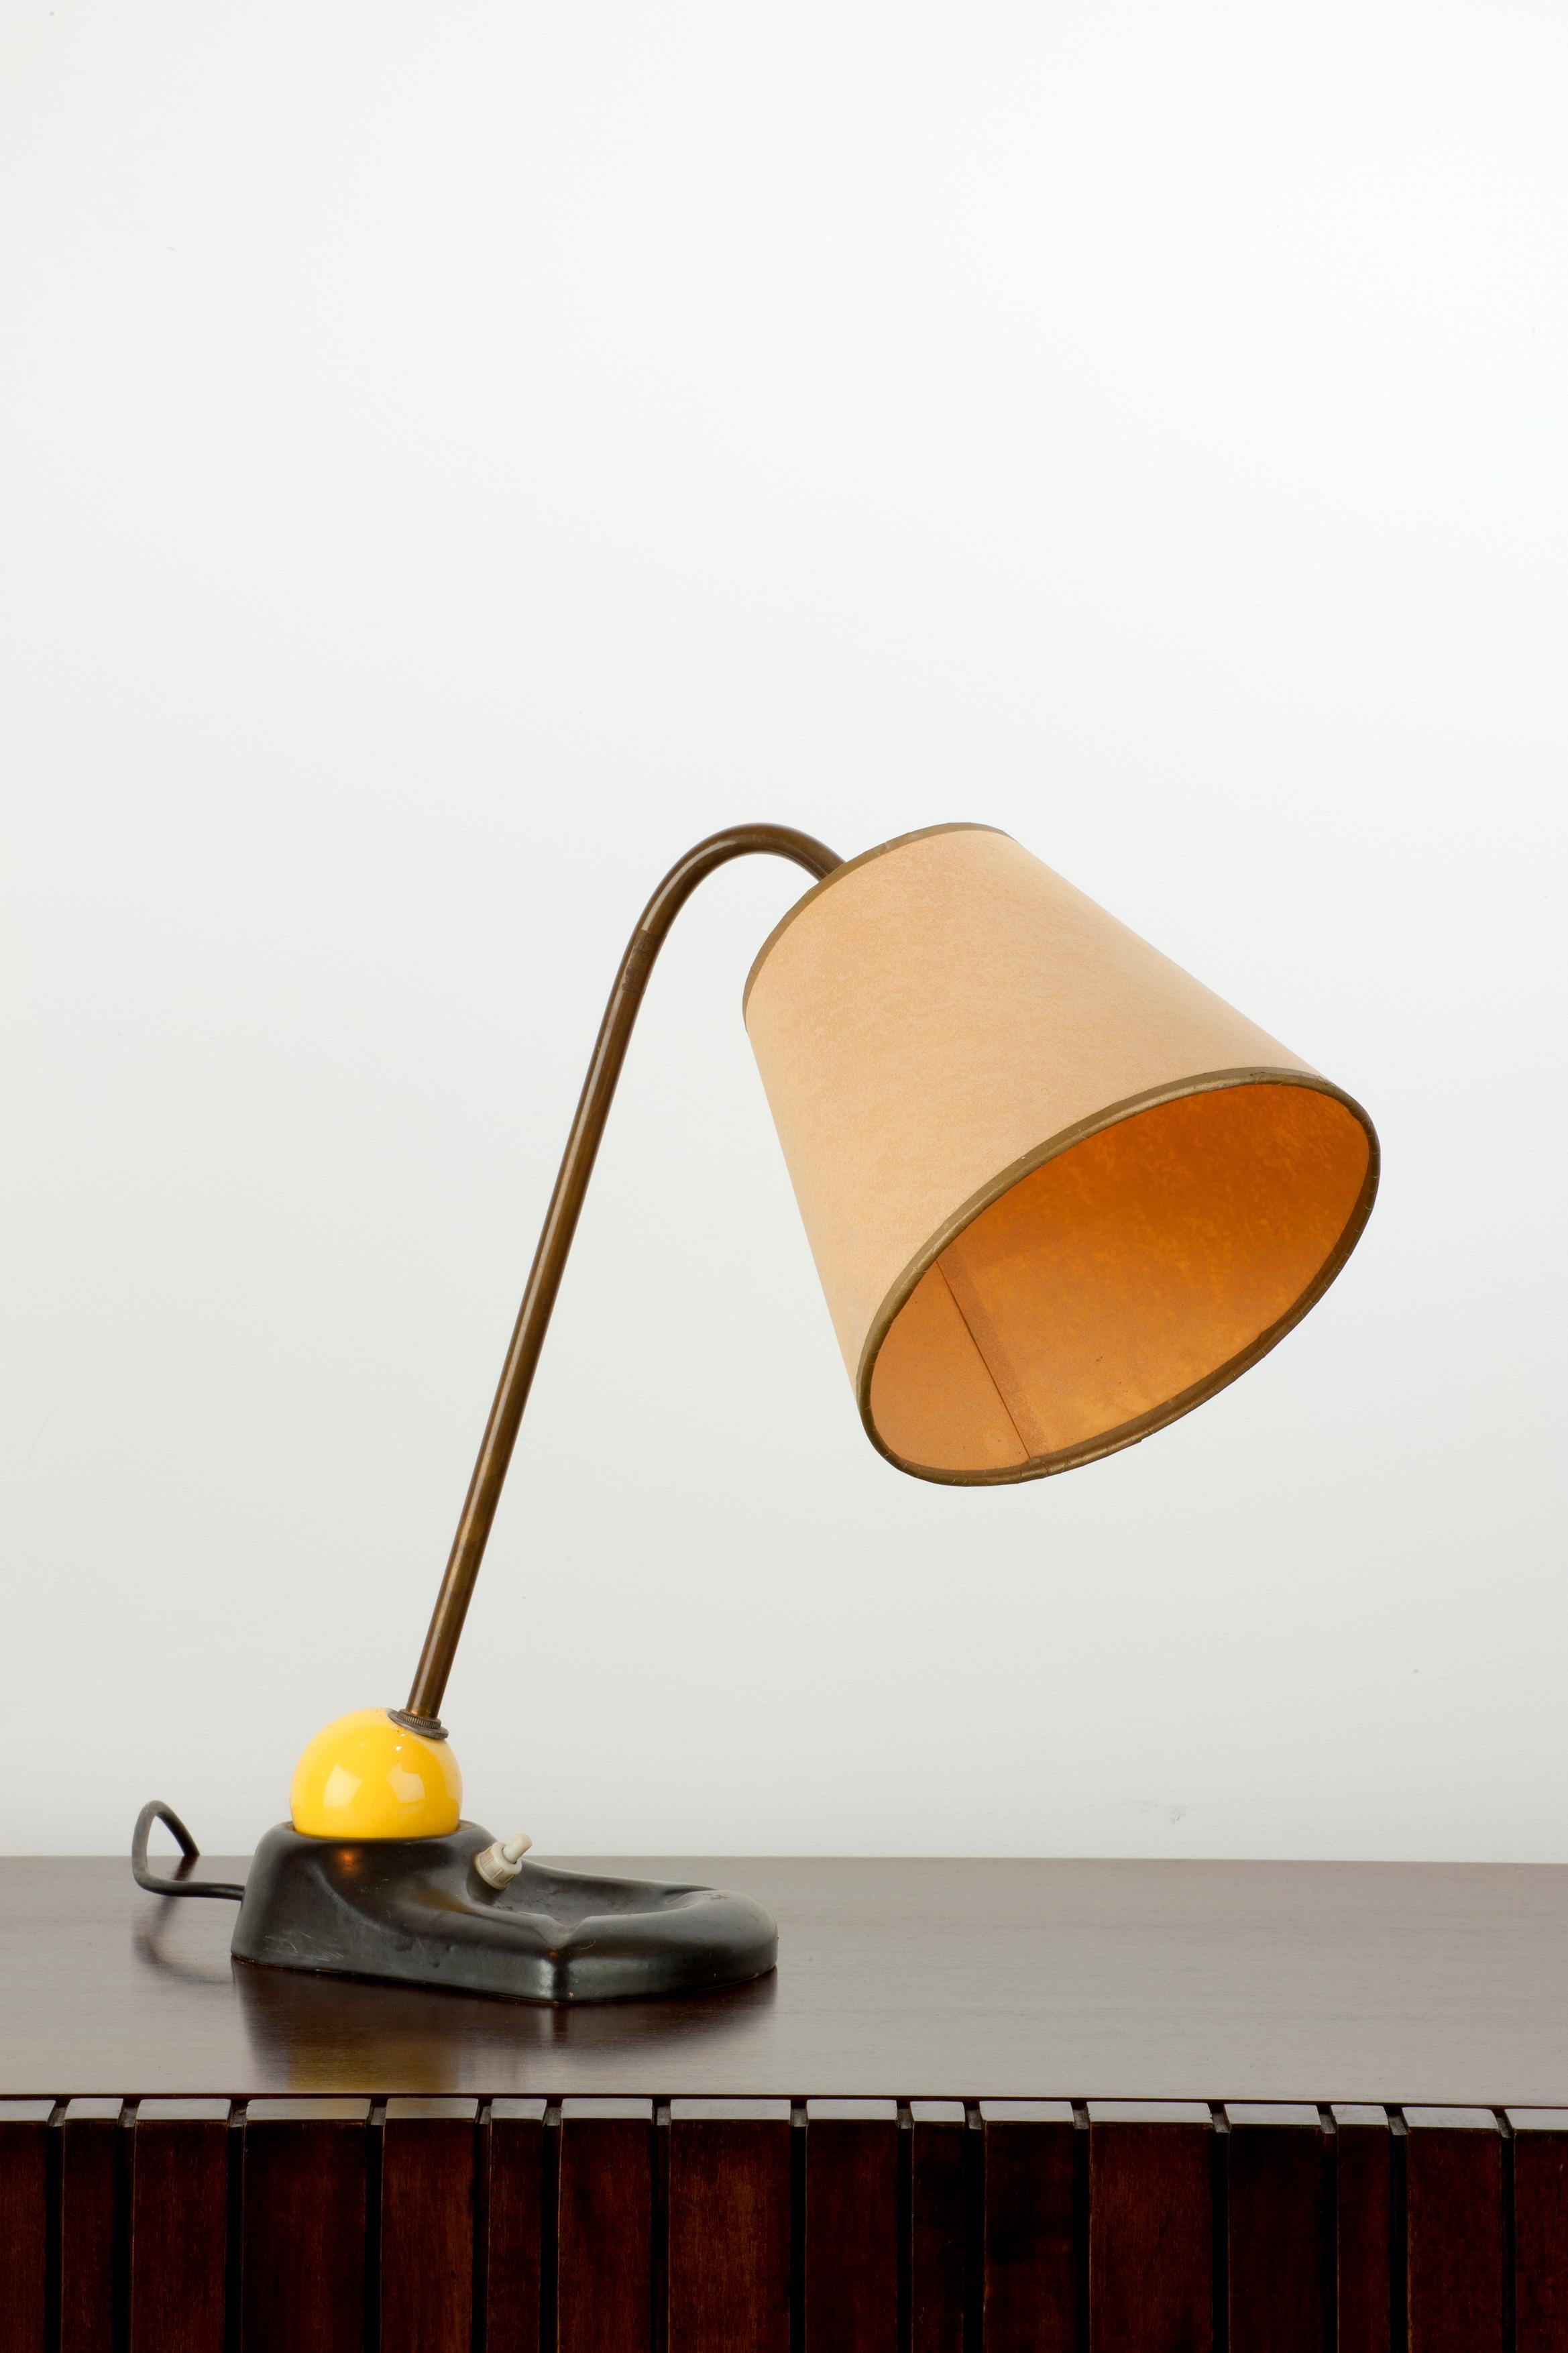 Unusual French ceramic table lamp with brass stem and ceramic base in black and yellow.